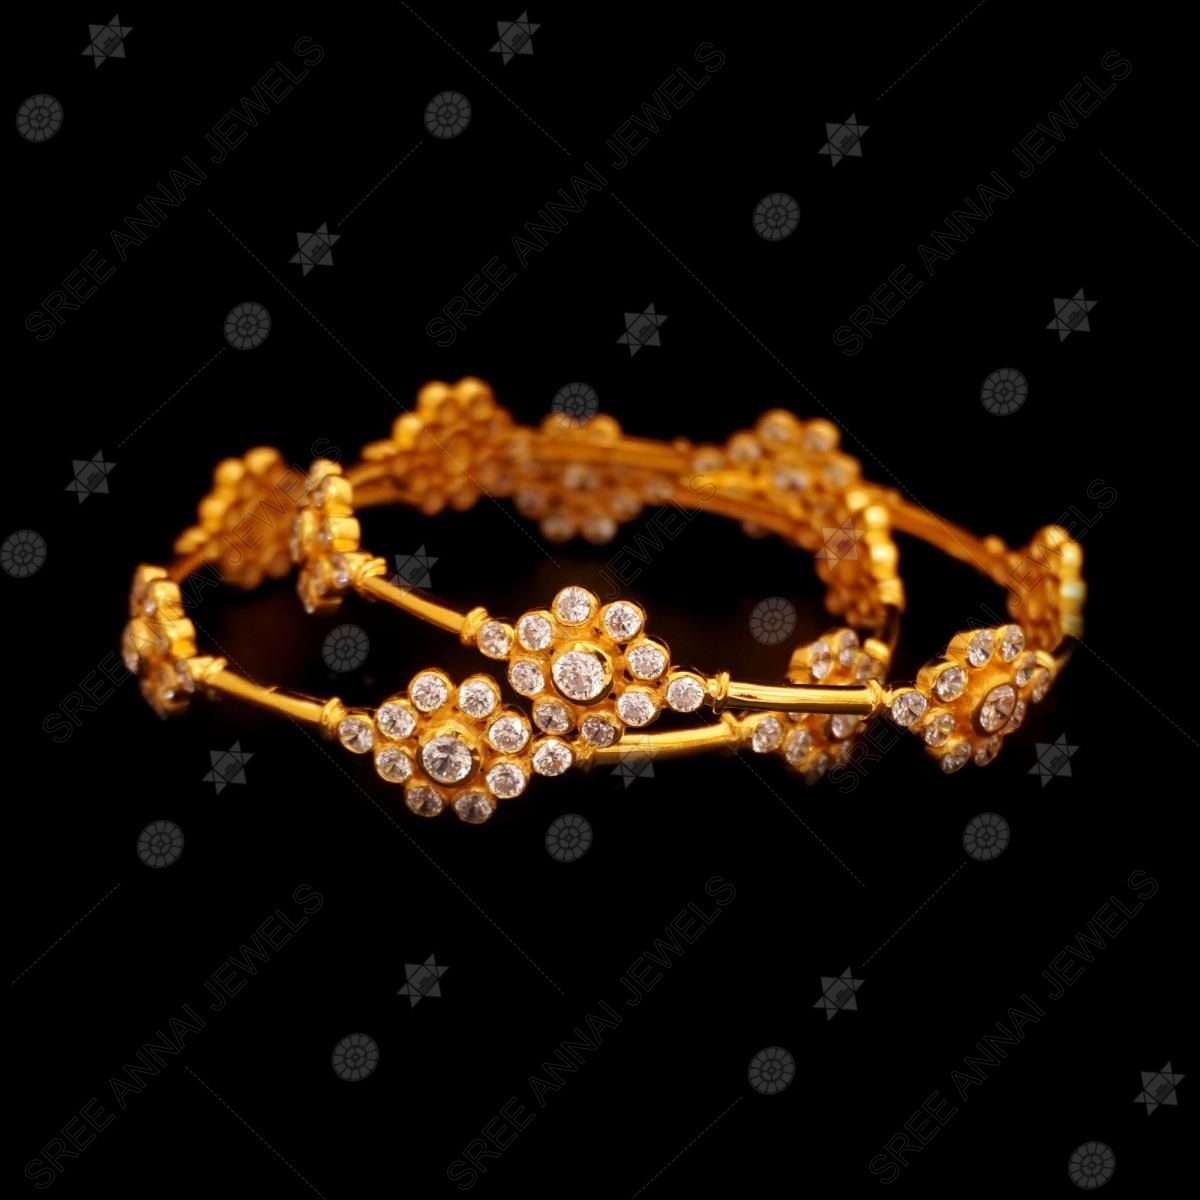 New Collection Daily Wear Brass Gold Plated Shagun Bangle Set (pack Of 4)  at Rs 43/set onwards, Kandivali West, Mumbai